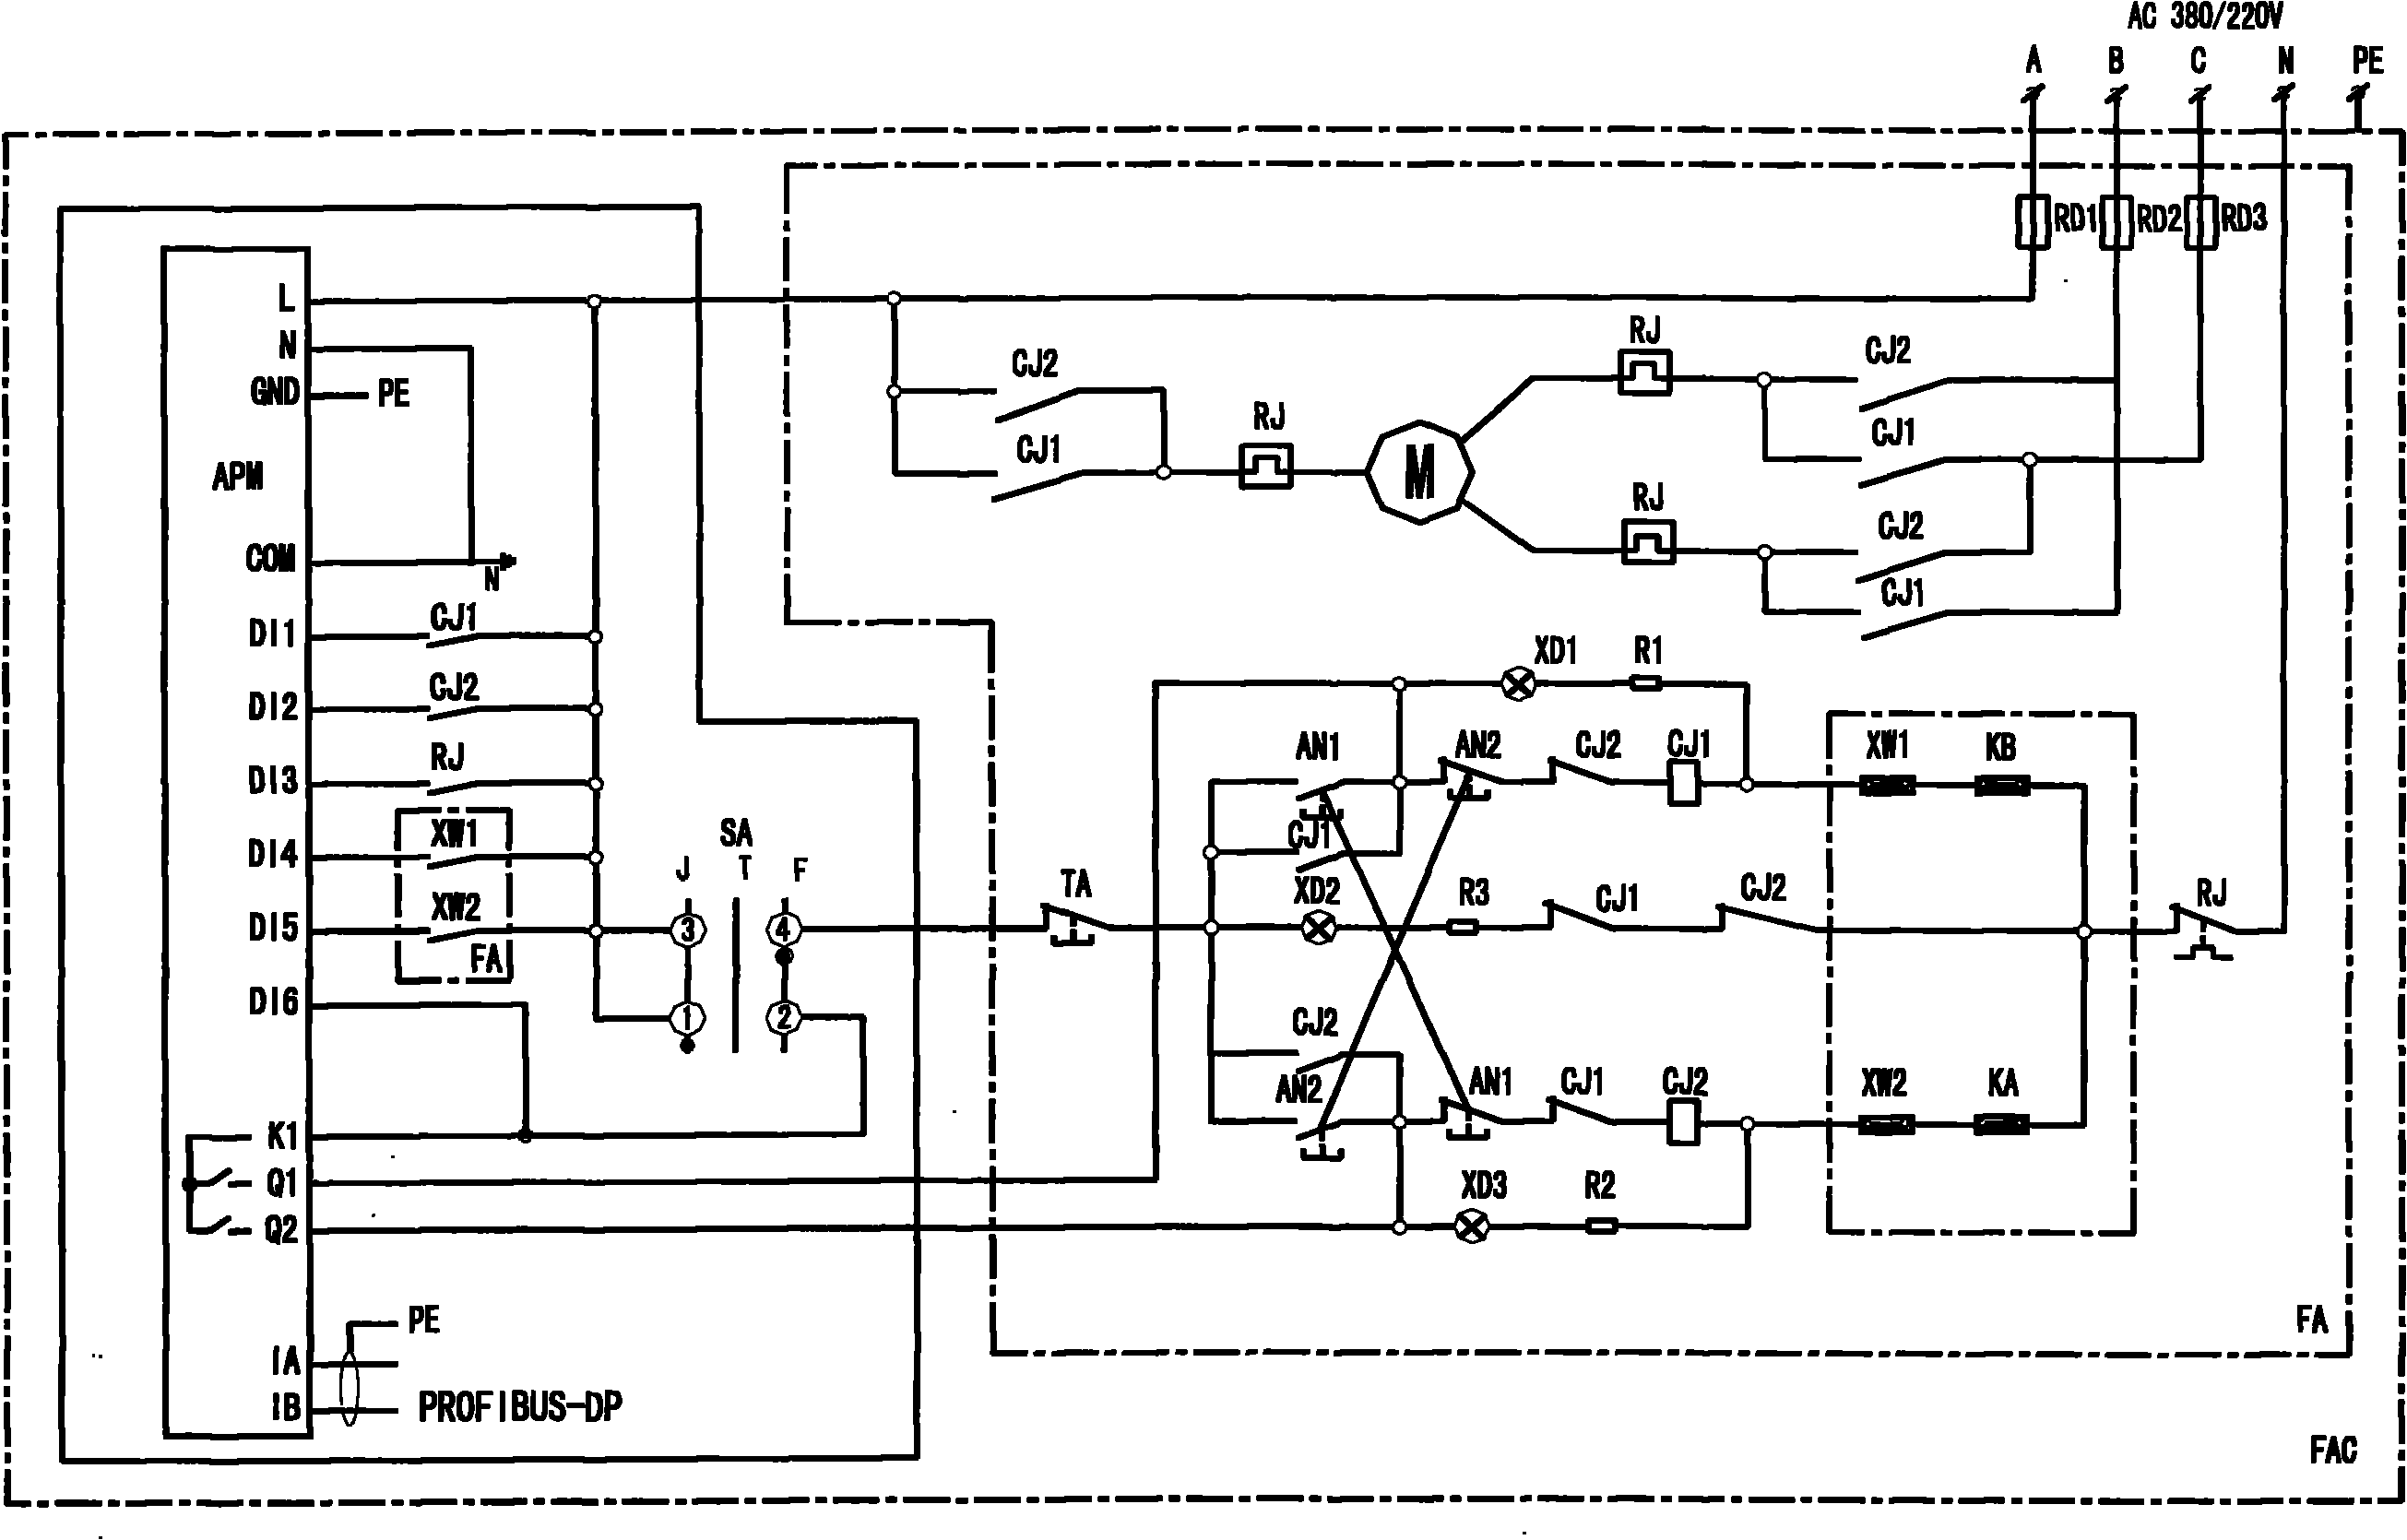 Electric valve control device capable of realizing intelligent control